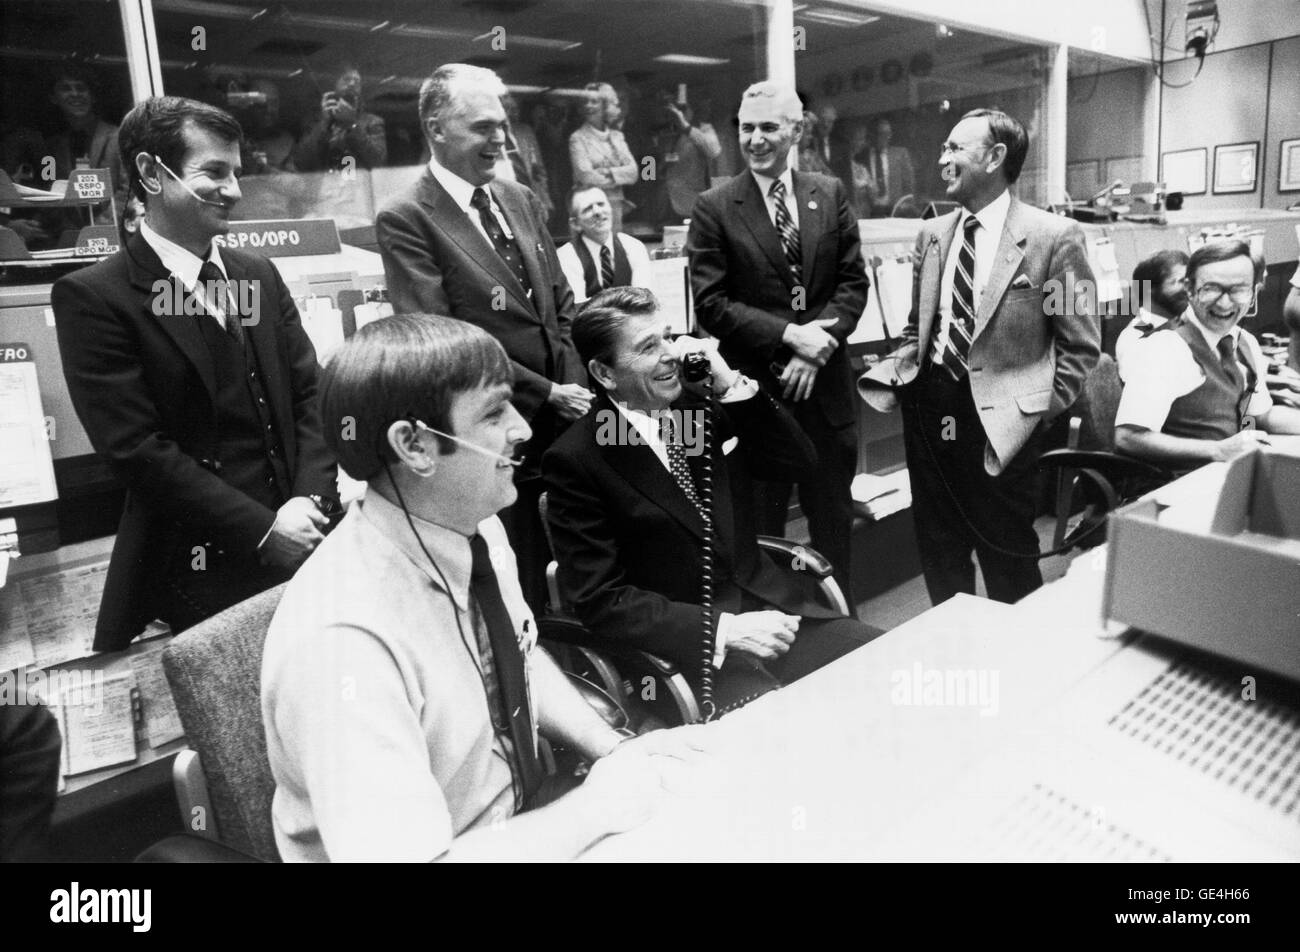 President Ronald Reagan gets a laugh from NASA officials in Mission Control when he jokingly asks crew members, astronauts Joe Engle and Richard Truly if they could stop by Washington en route to their California landing site in order that he might come along. The STS-2 crew was in their next to last day on orbit when the conversation took place. From left to right standing: Terry J. Hart, NASA Deputy Administrator Dr. Hans Mark, NASA Administrator James M. Beggs, JSC Director Dr. Christopher C. Kraft Jr. From left to right seated: CAPCOM, Astronaut Daniel C. Brandenstein President, Ronald Rea Stock Photo